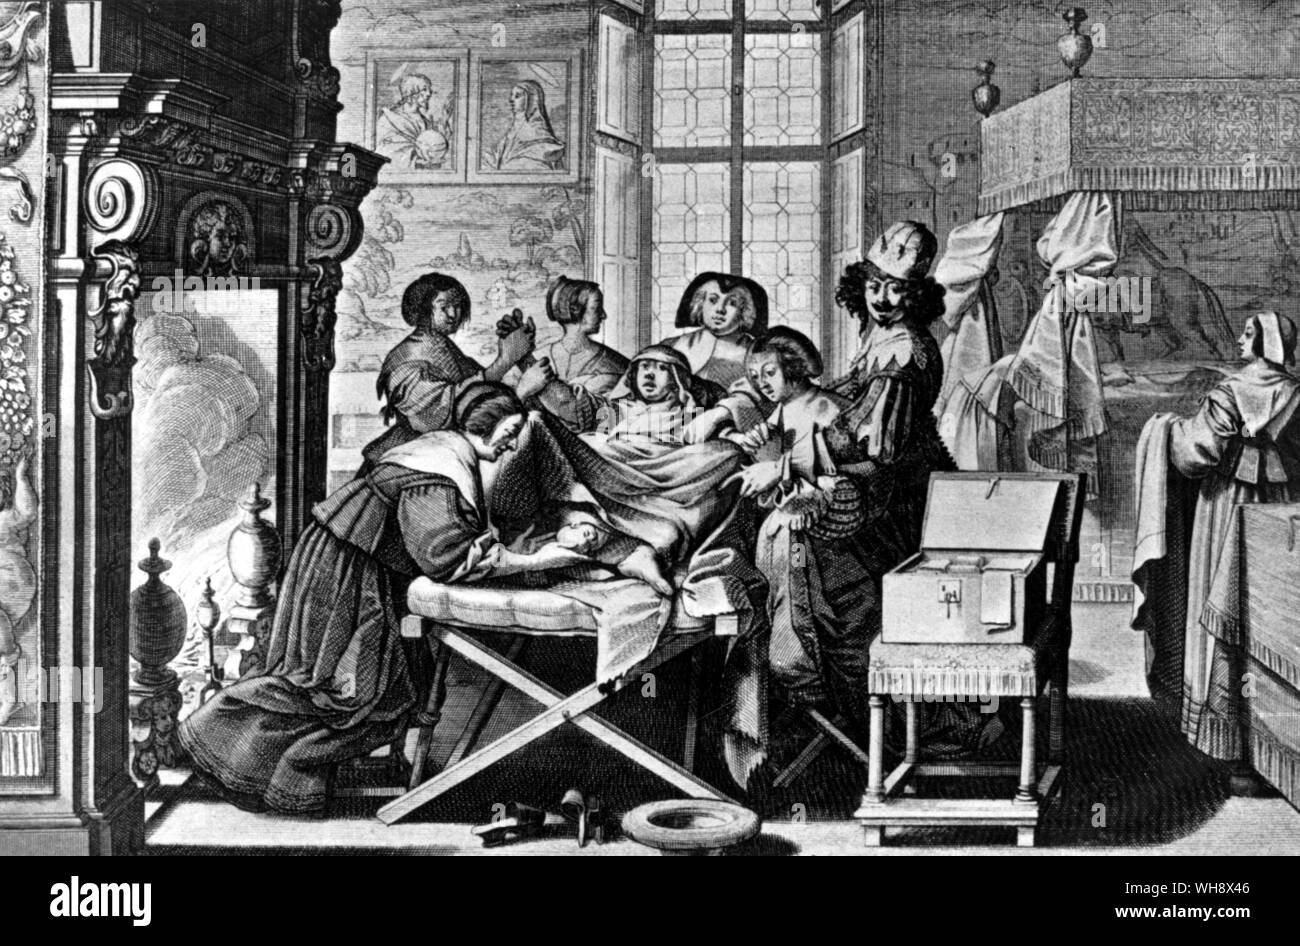 A childbirth scene from a Dutch seventeenth-century engraving by Abraham Bosse Stock Photo